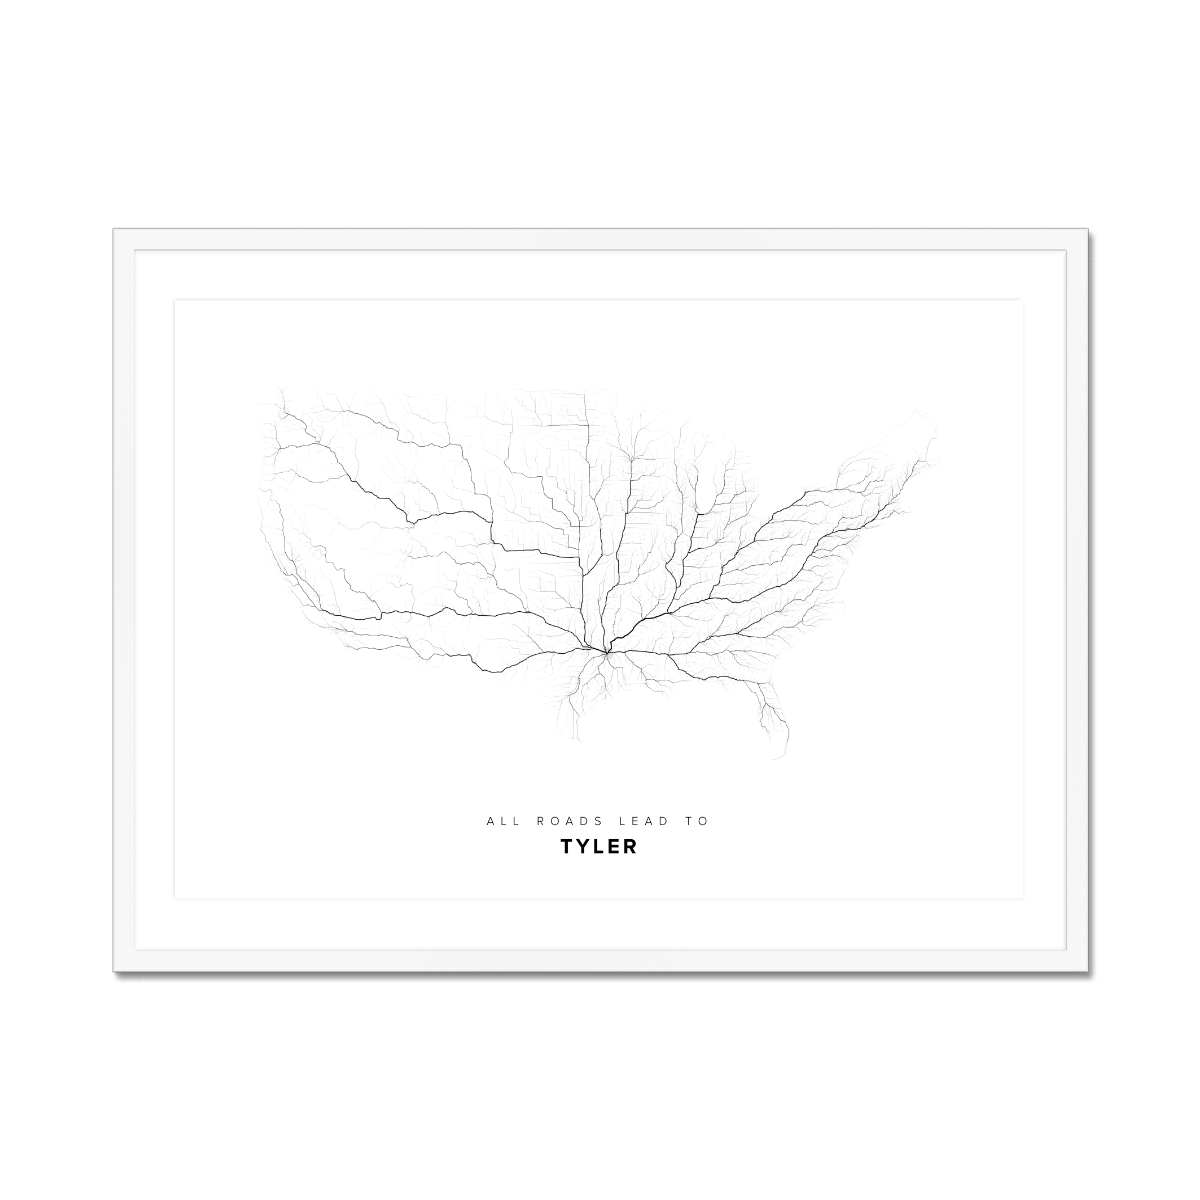 All roads lead to Tyler (United States of America) Fine Art Map Print